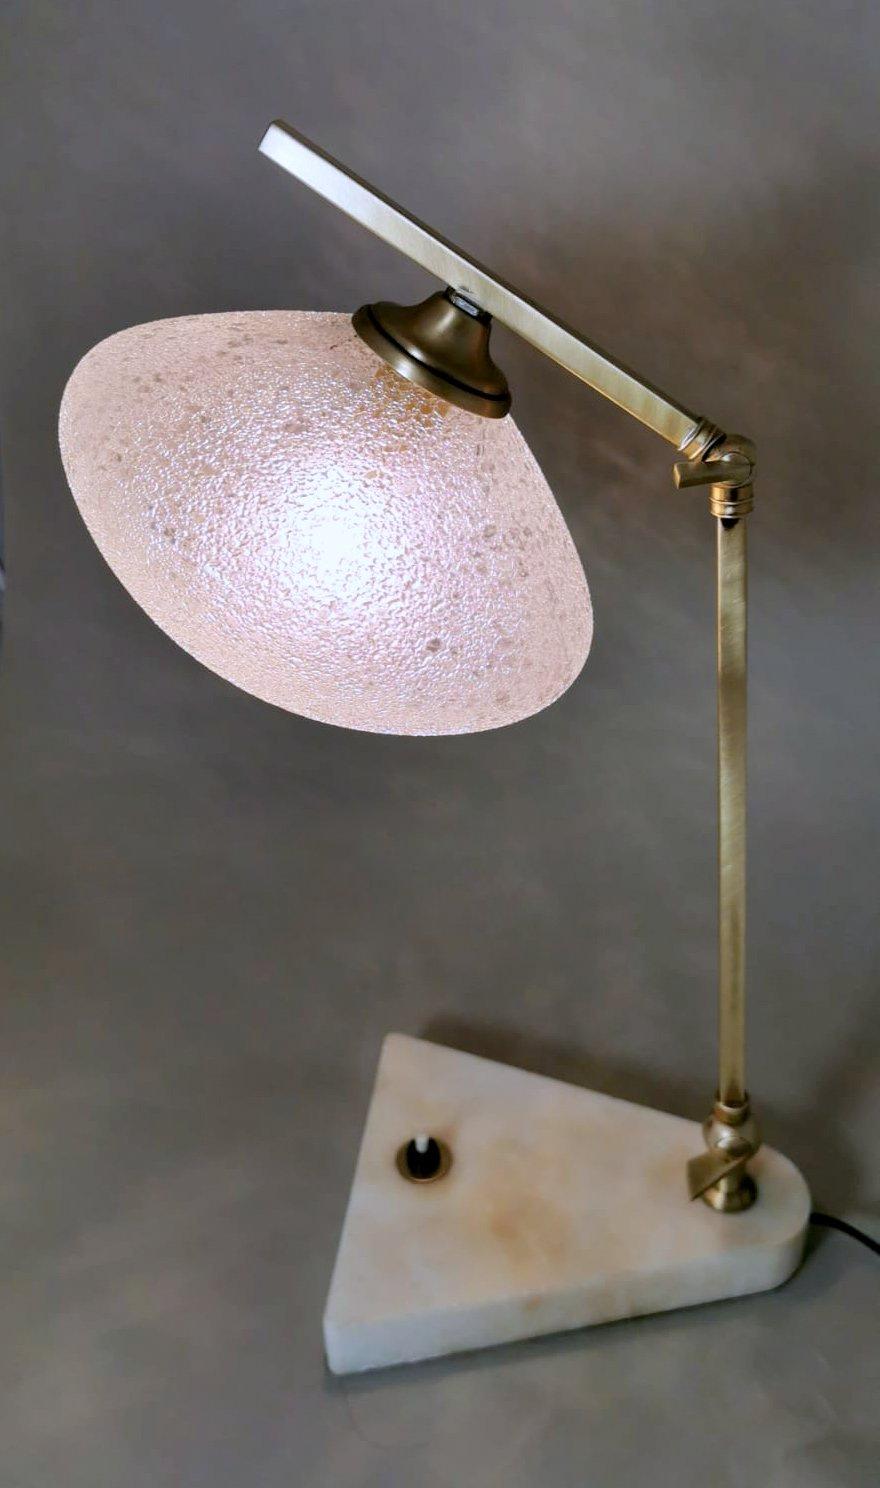 Vintage Italian Adjustable Table Lamp Made of Brass, Glass and Marble In Good Condition For Sale In Prato, Tuscany